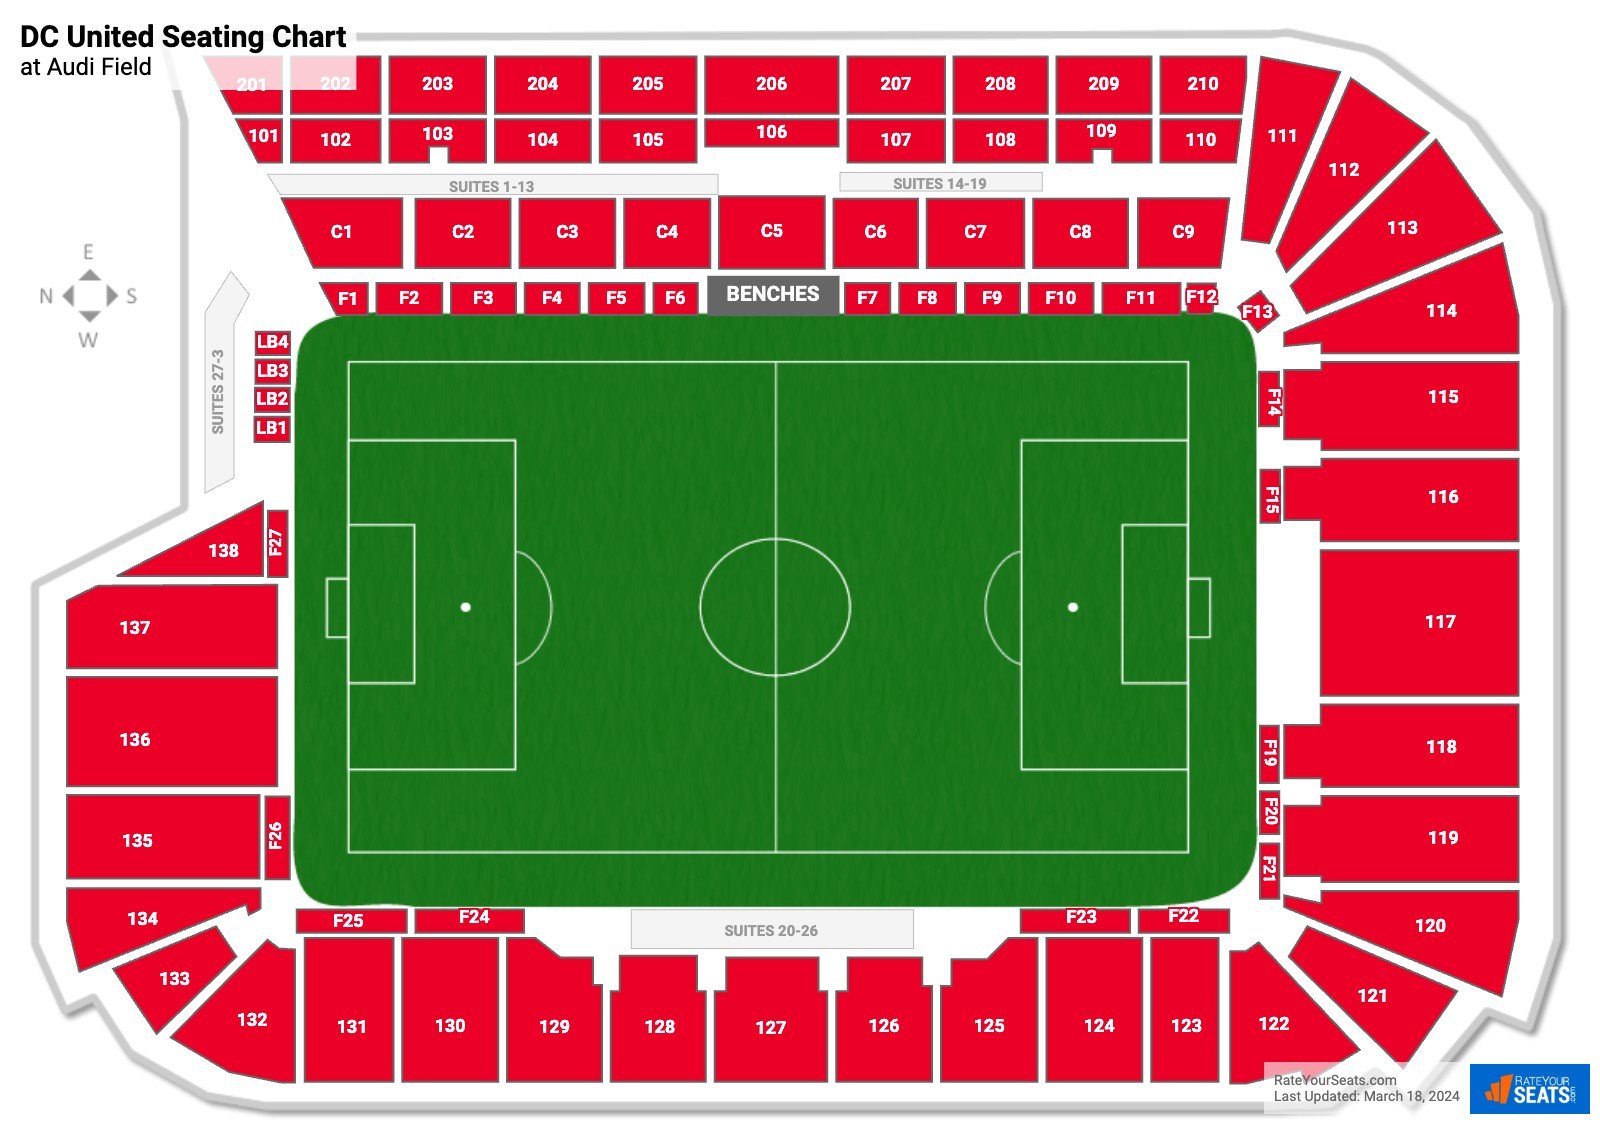 DC United Seating Chart at Audi Field